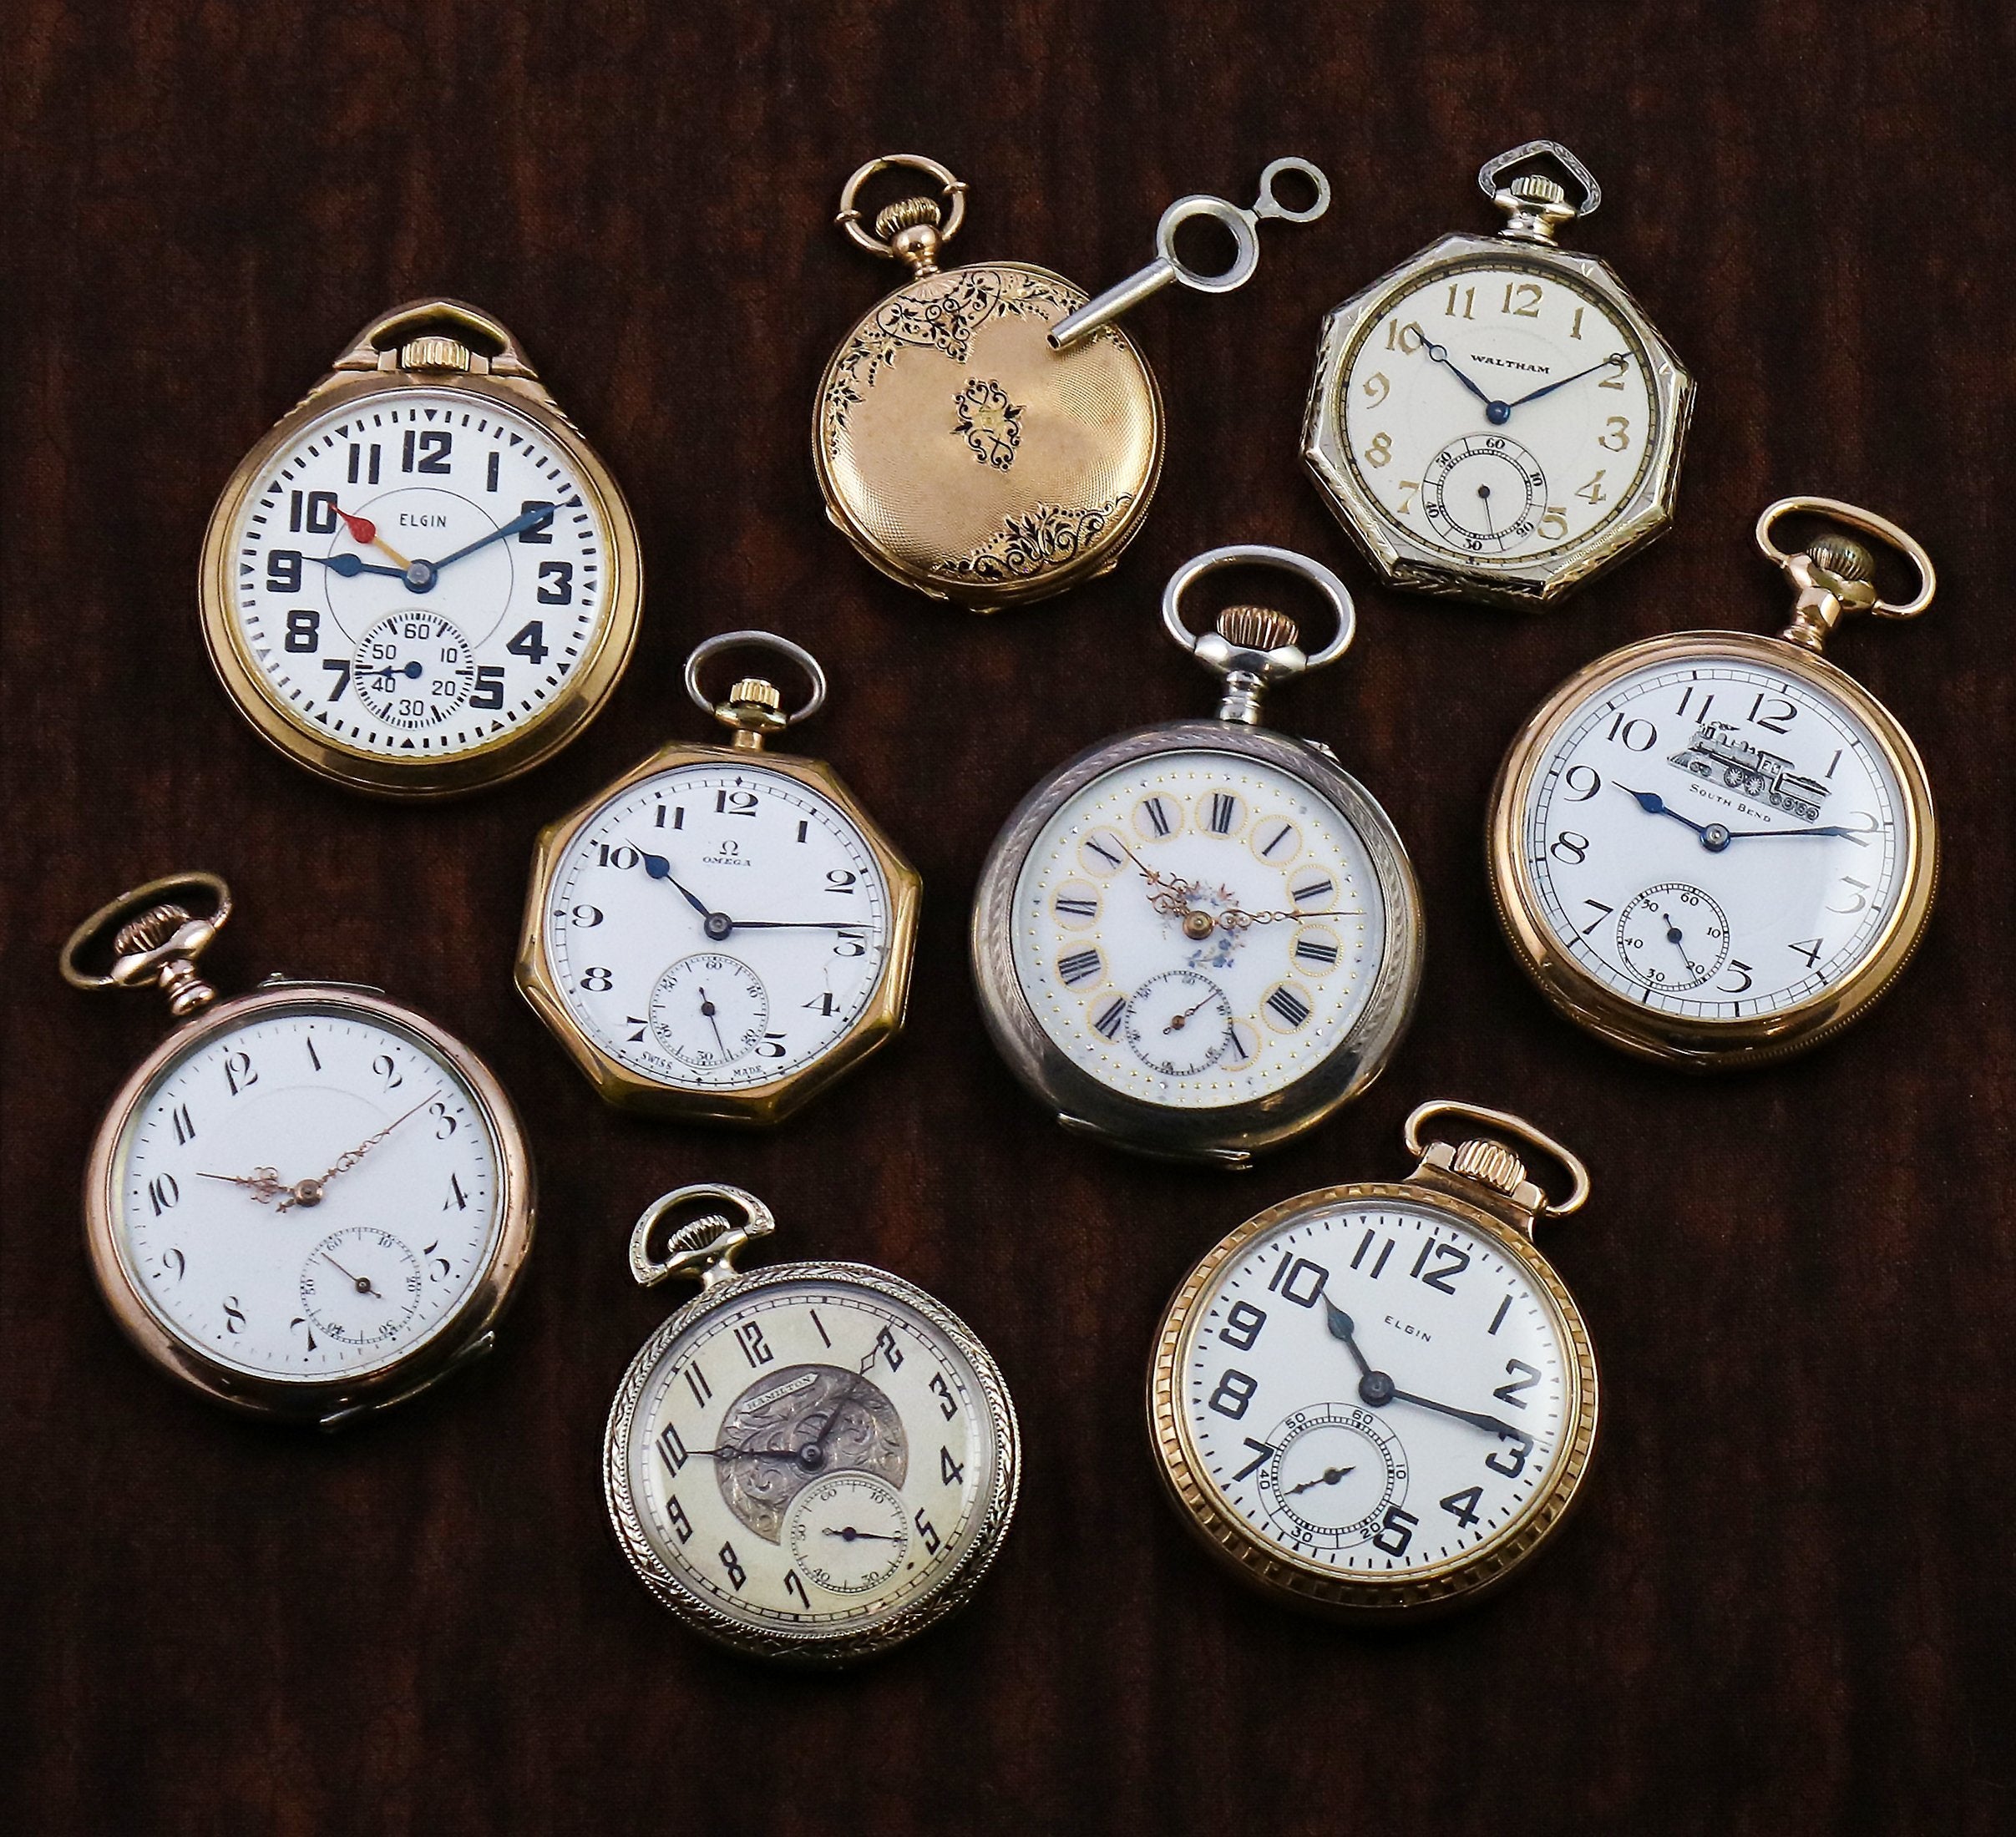 Best pocket watches for men that have antique-style charm | Evening Standard